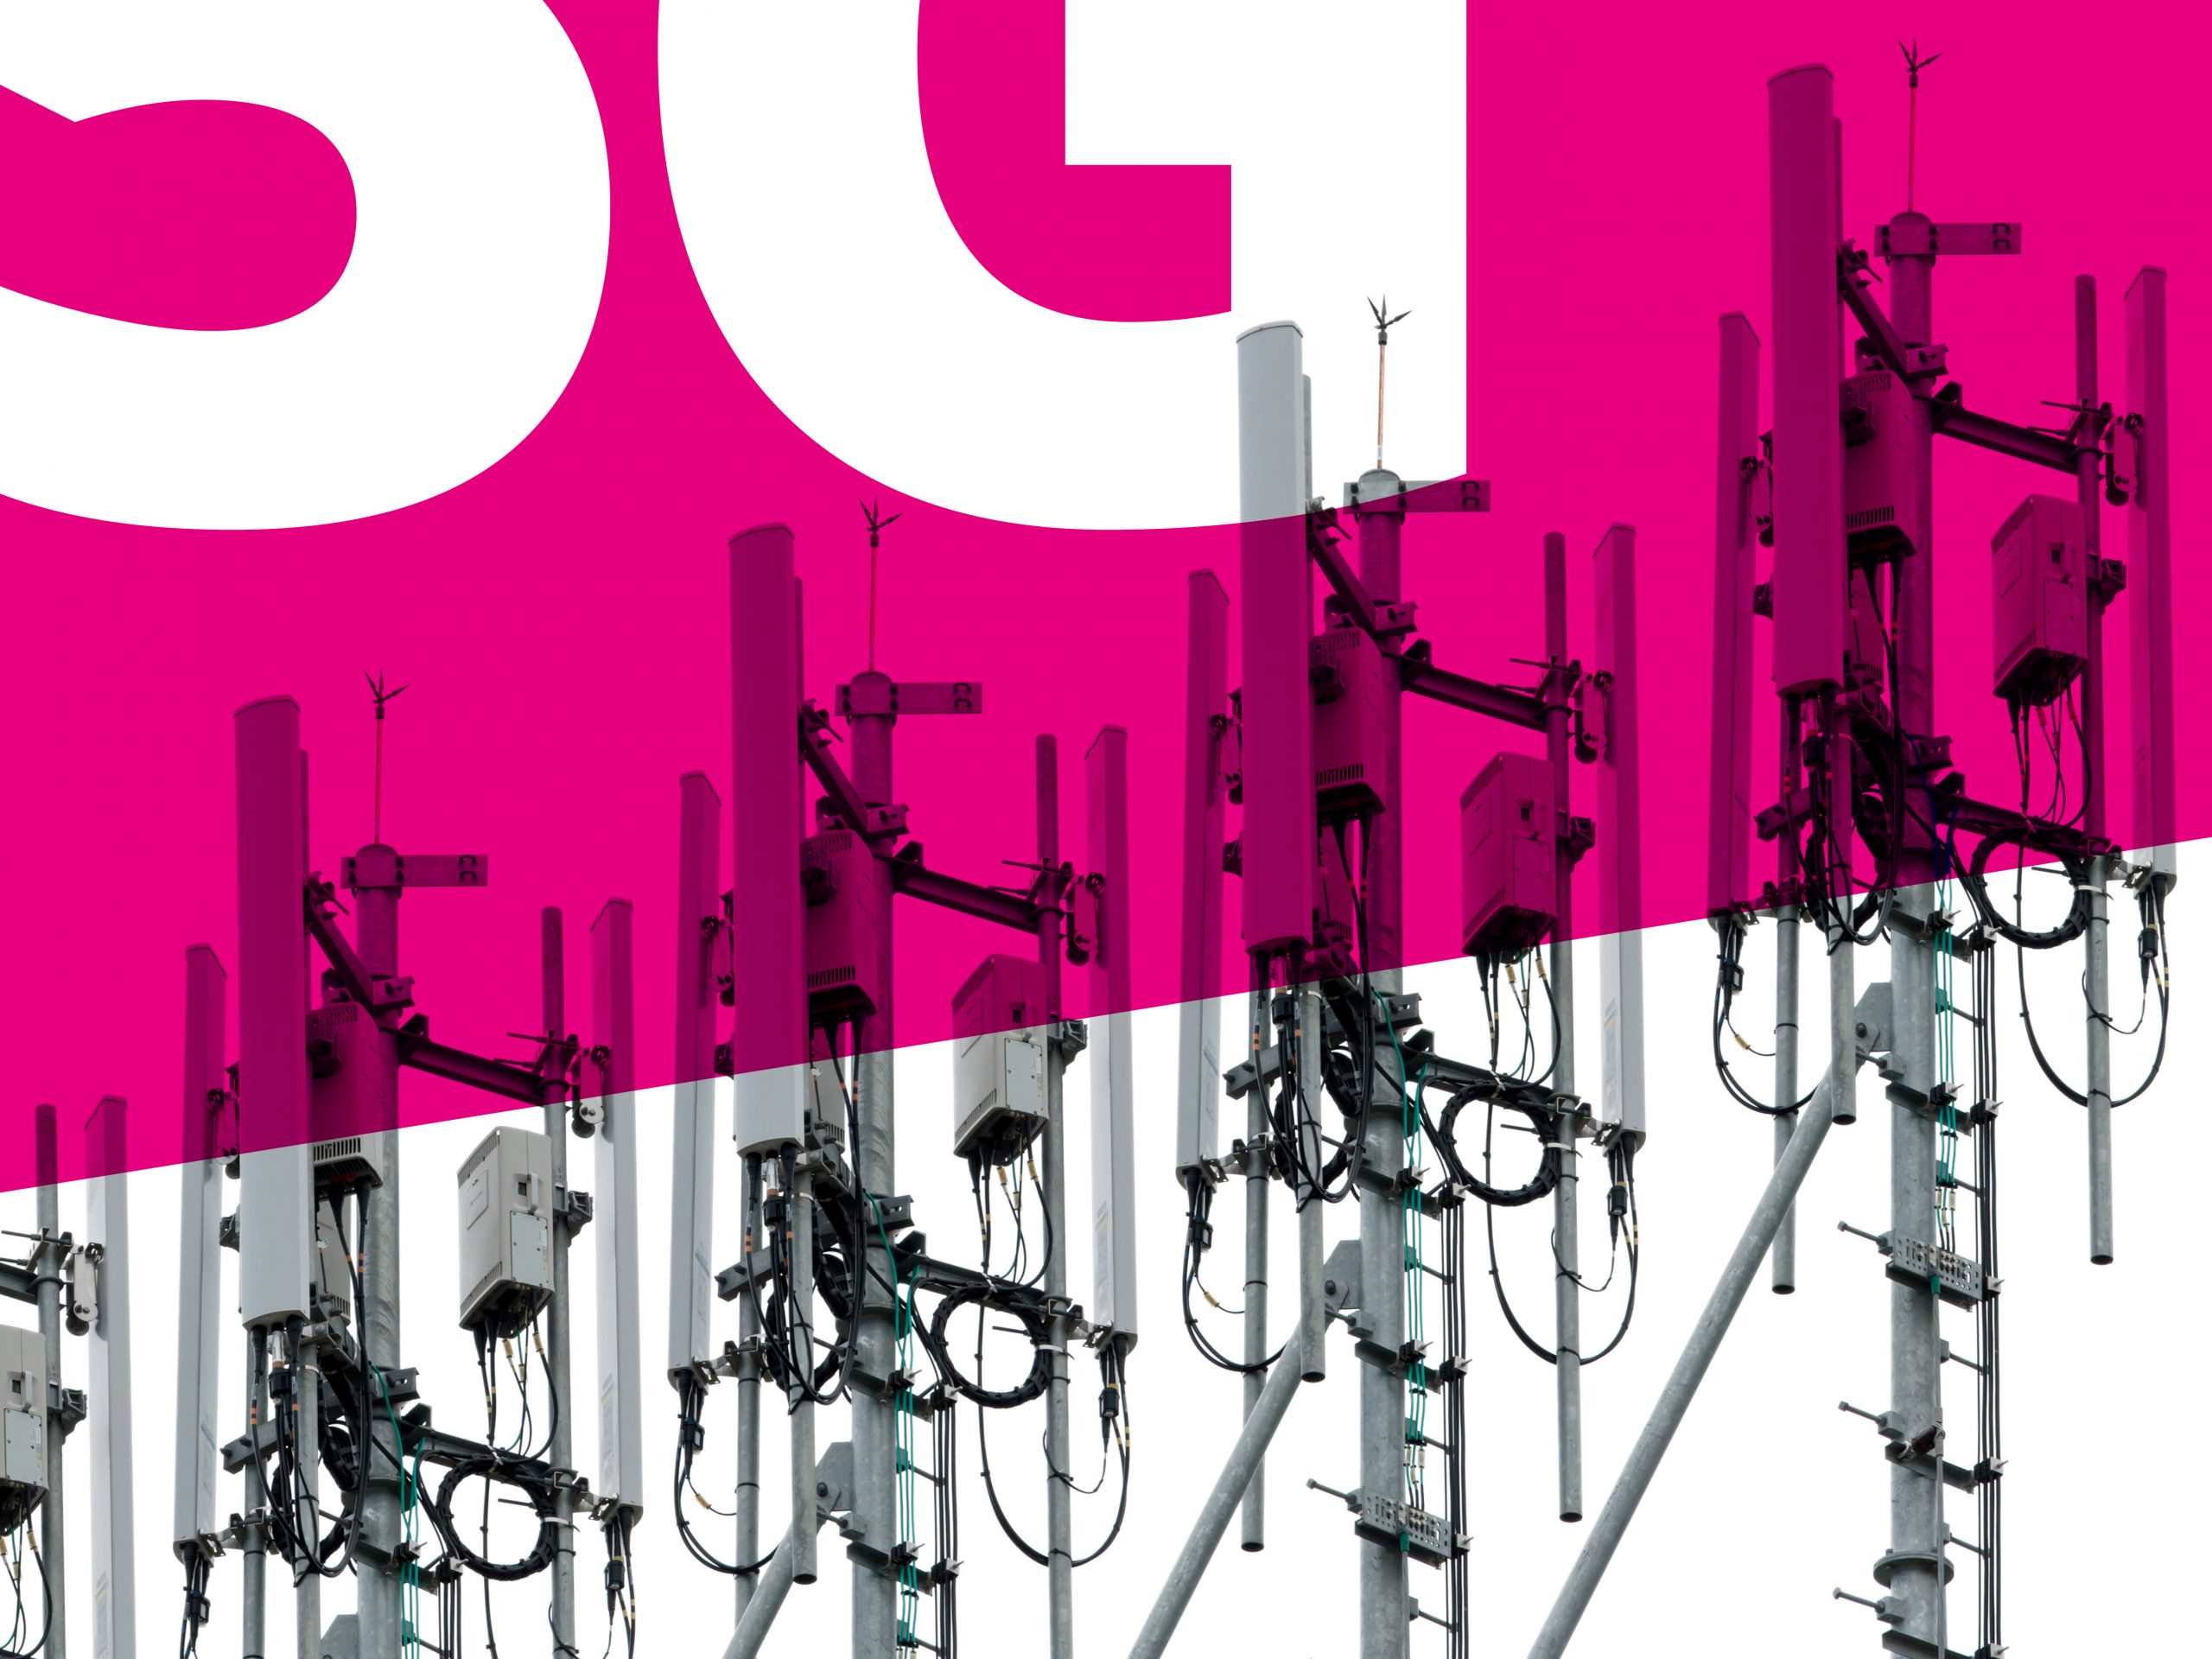 Are there really any benefits to 5G?